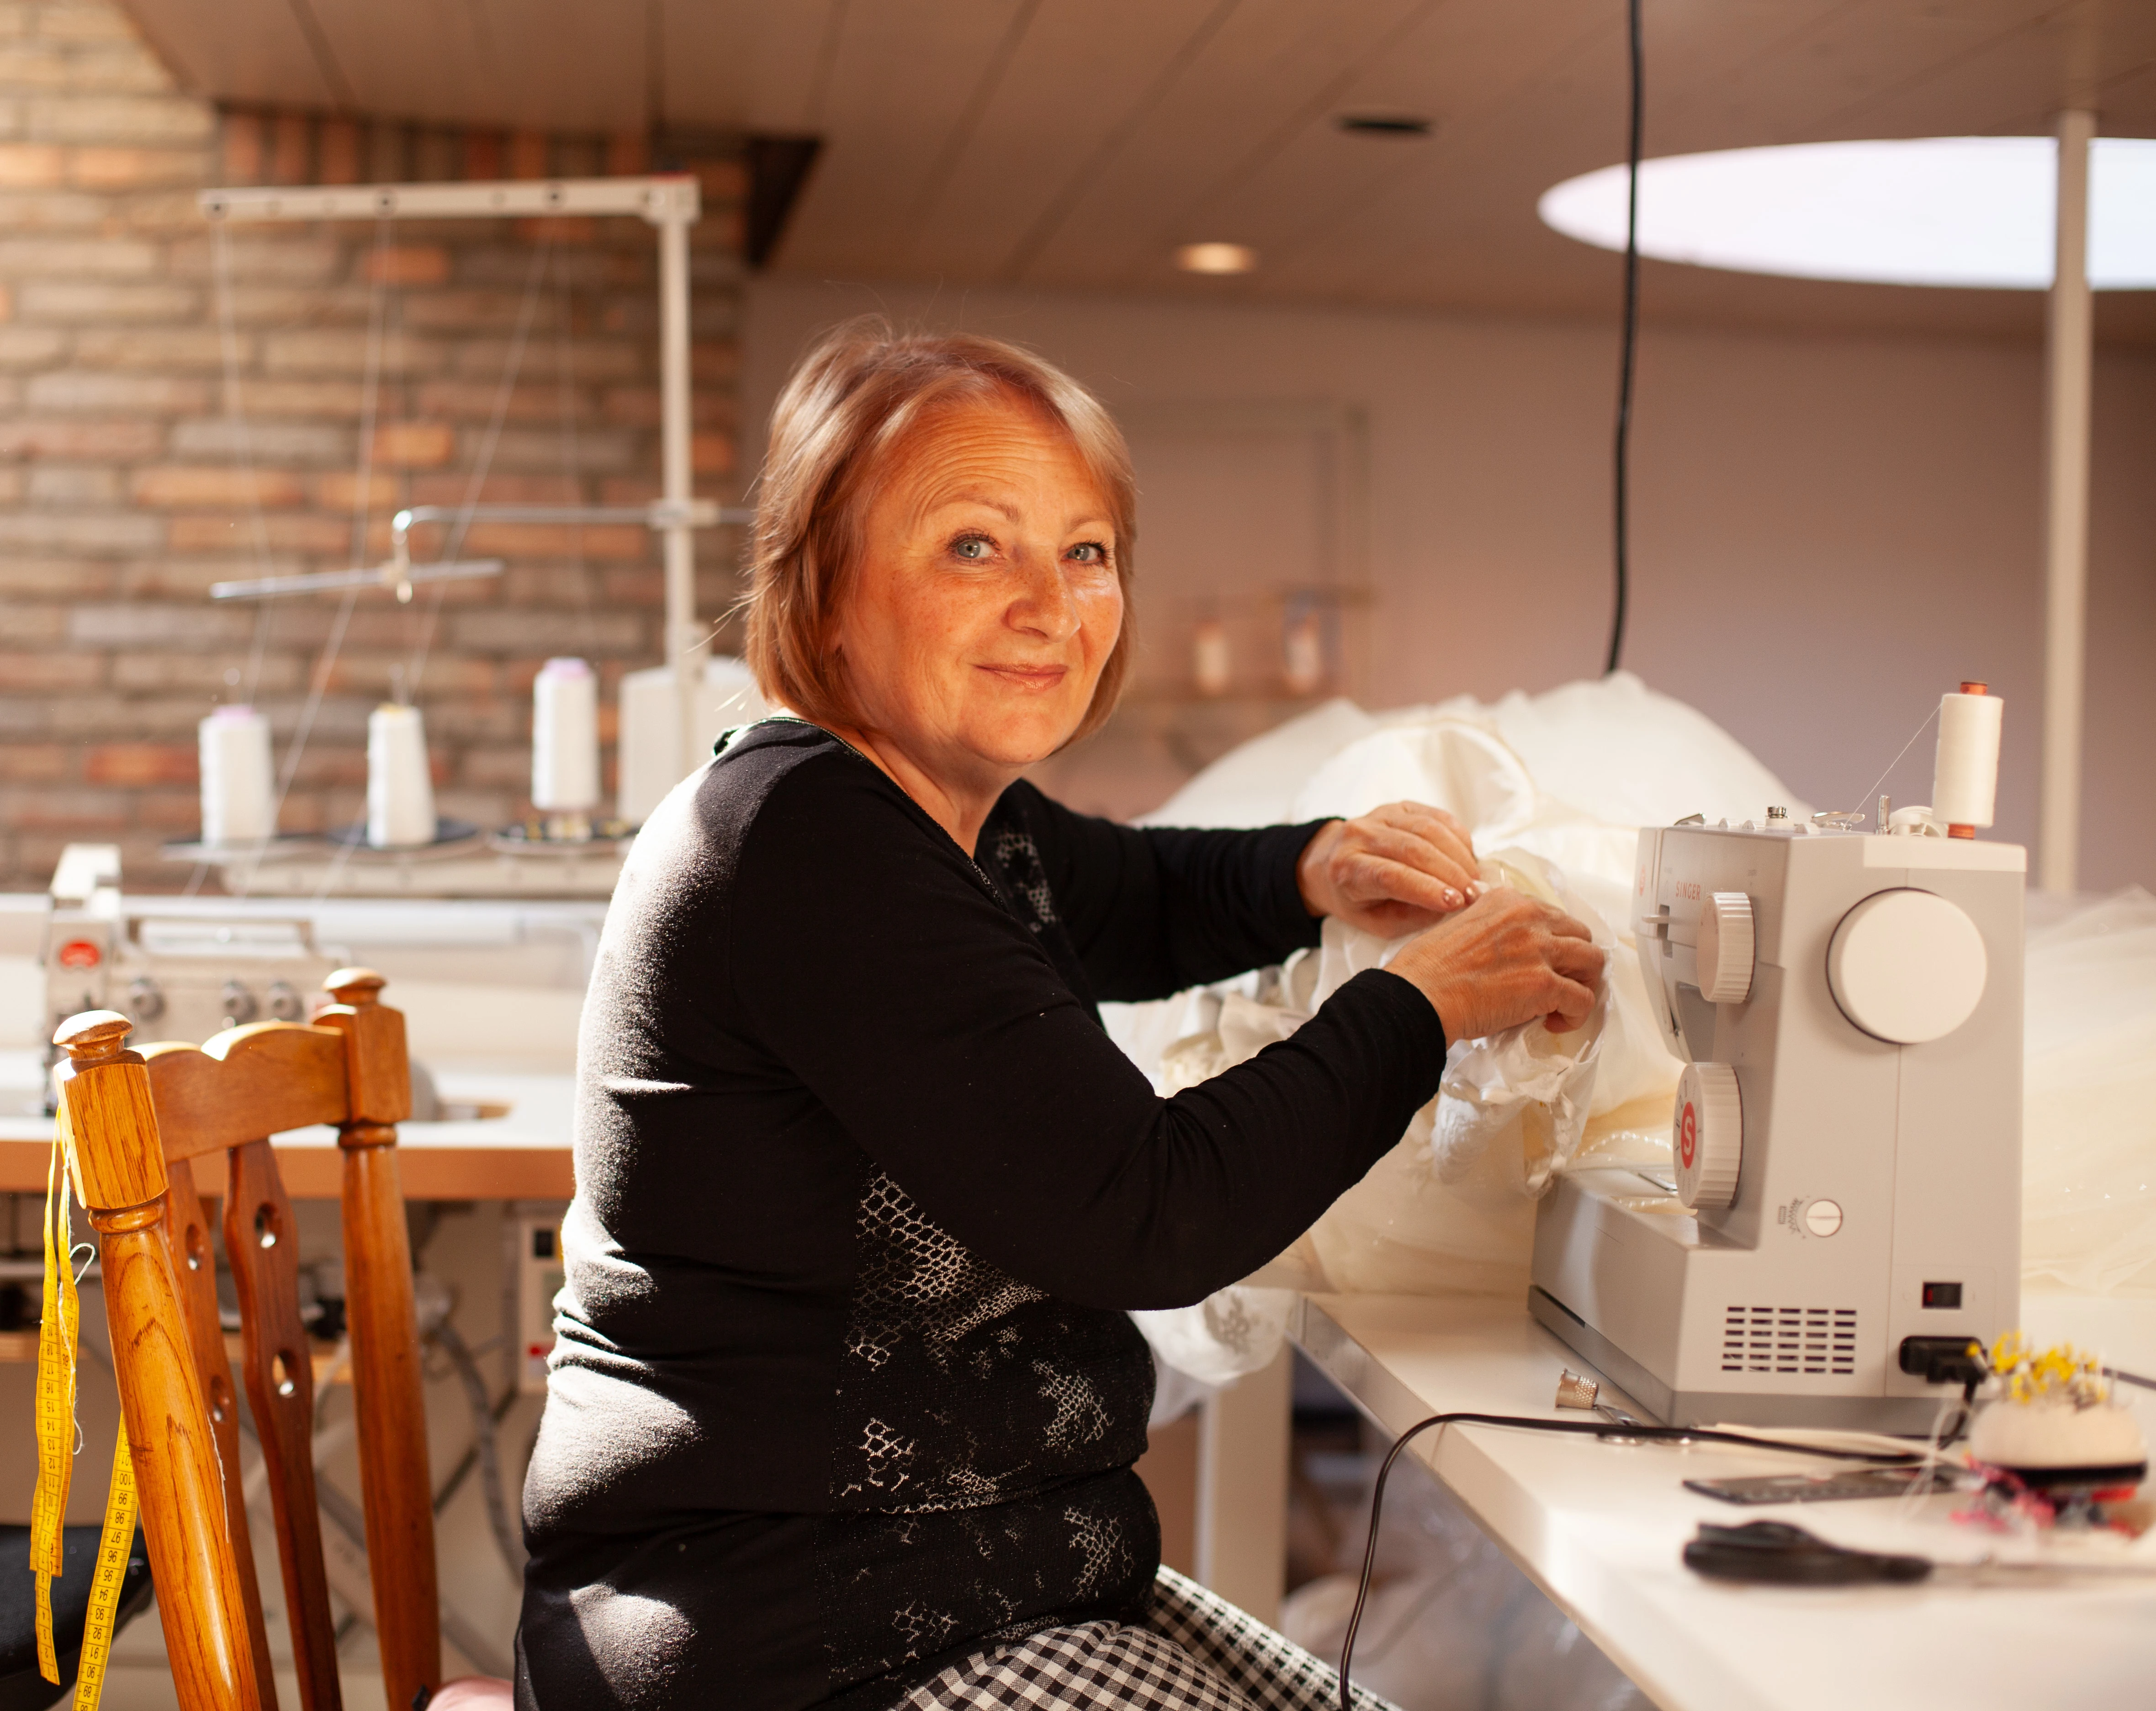 A Ukrainian woman is at work behind the sewing machine